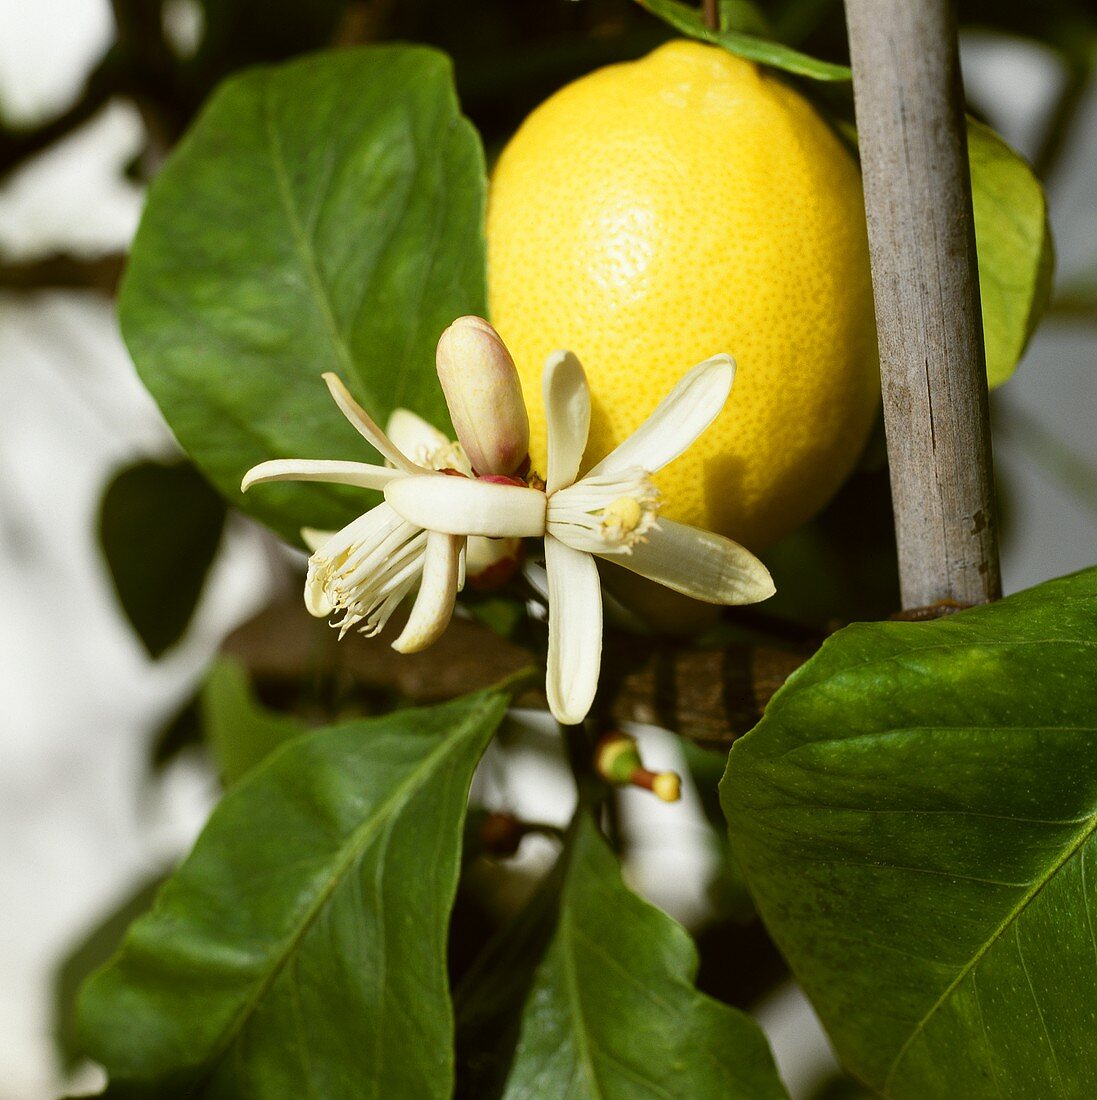 Lemons with flowers on the tree (Citrus limon)